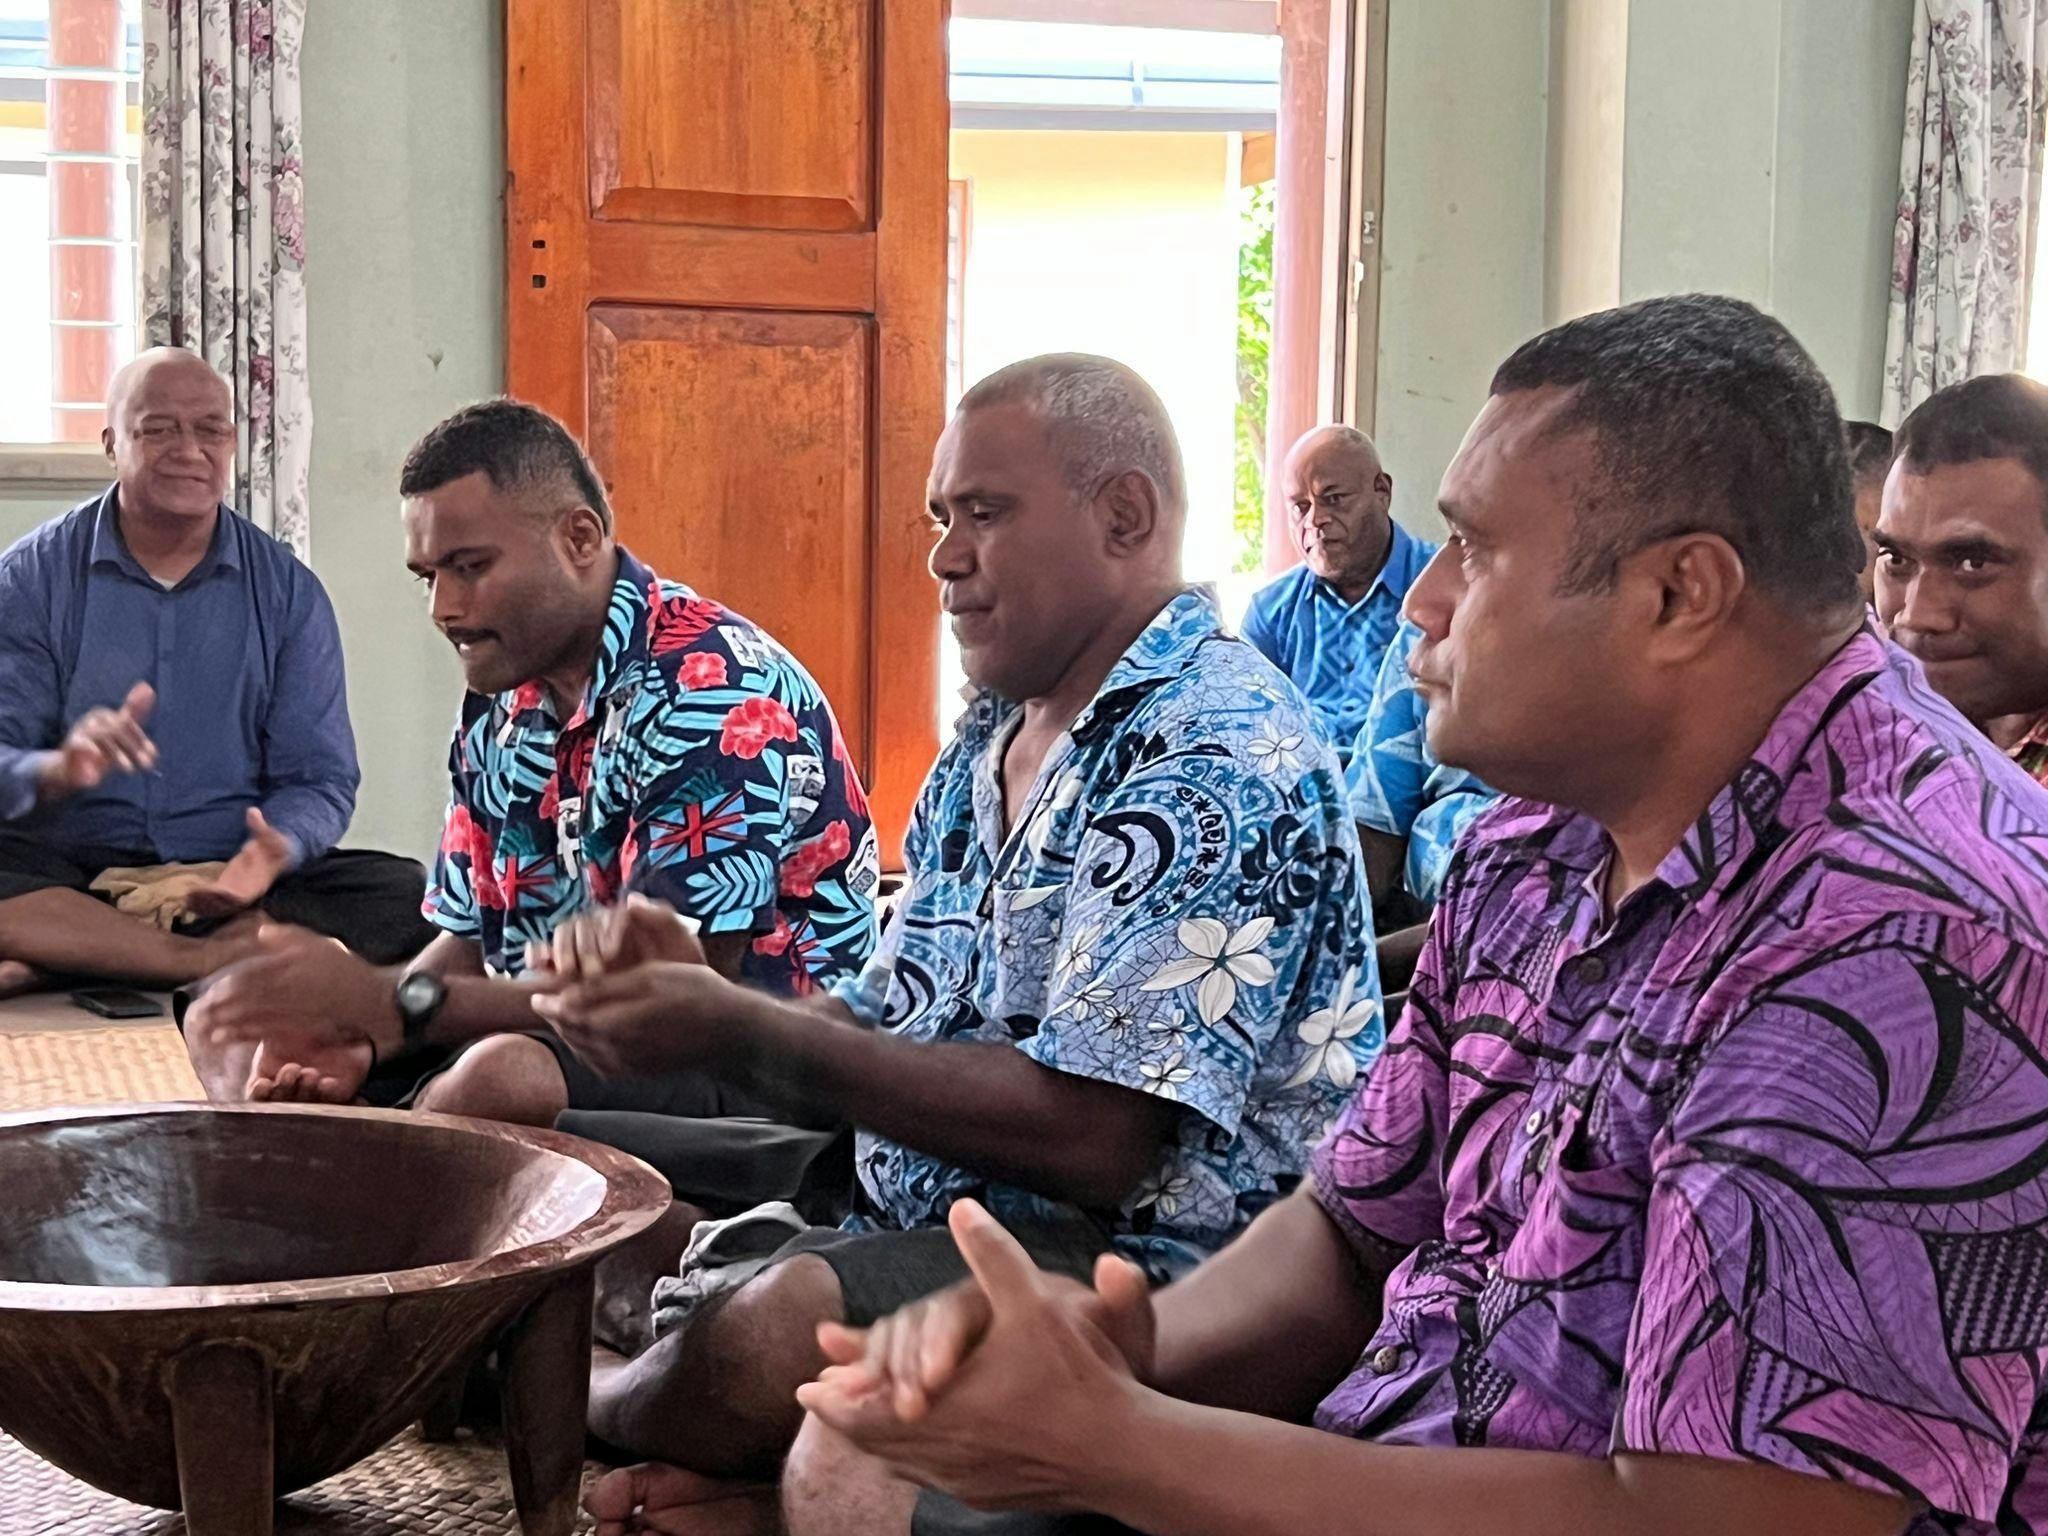 Live-in Caretakers to benefit from ground-breaking UK & Fiji connection to provide affordable, world-class security personnel